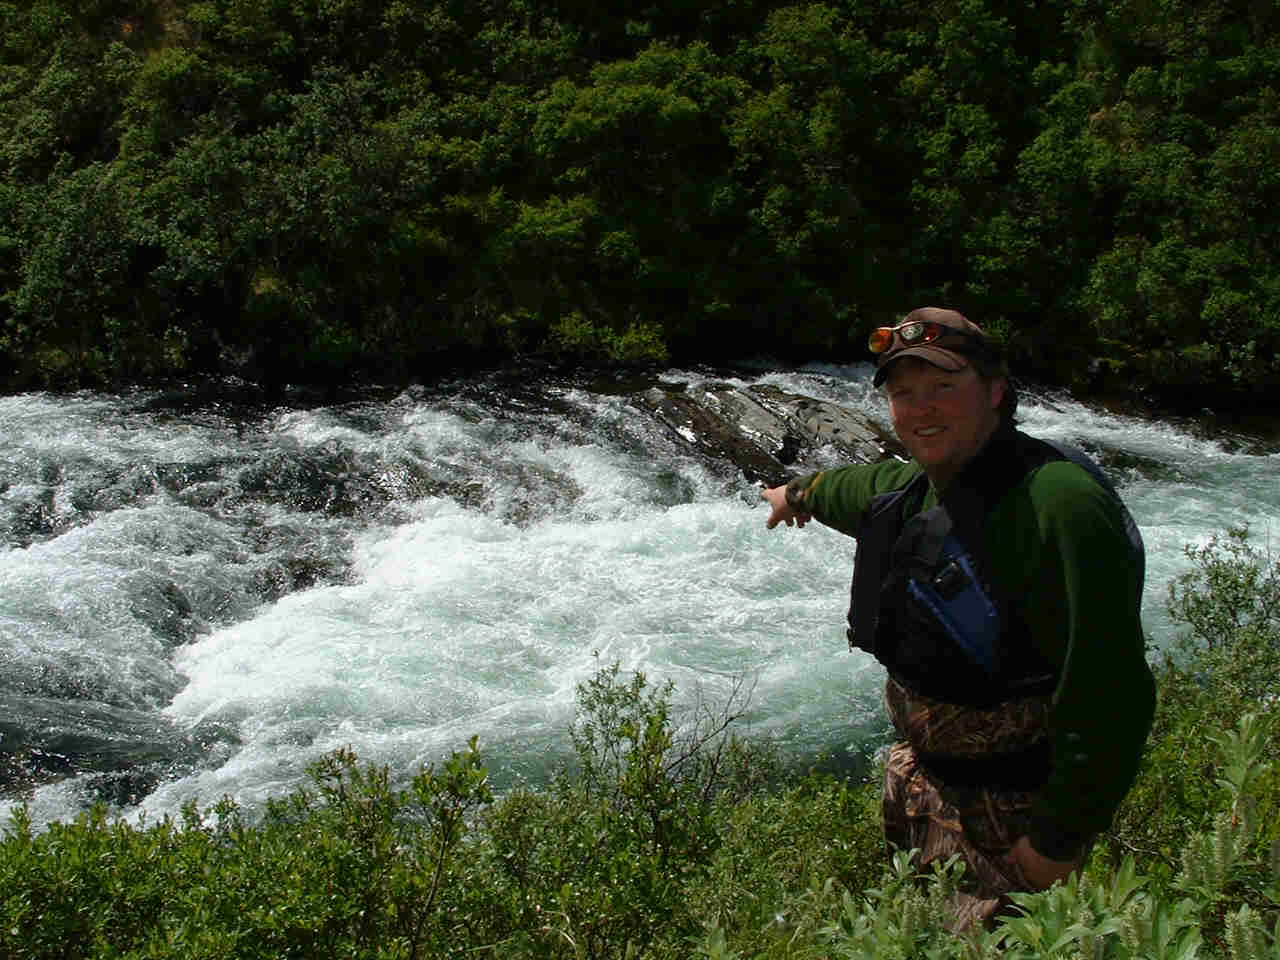 Thrilling Technical Whitewater - American Creek Falls - ALASKA RAFT CONNECTION